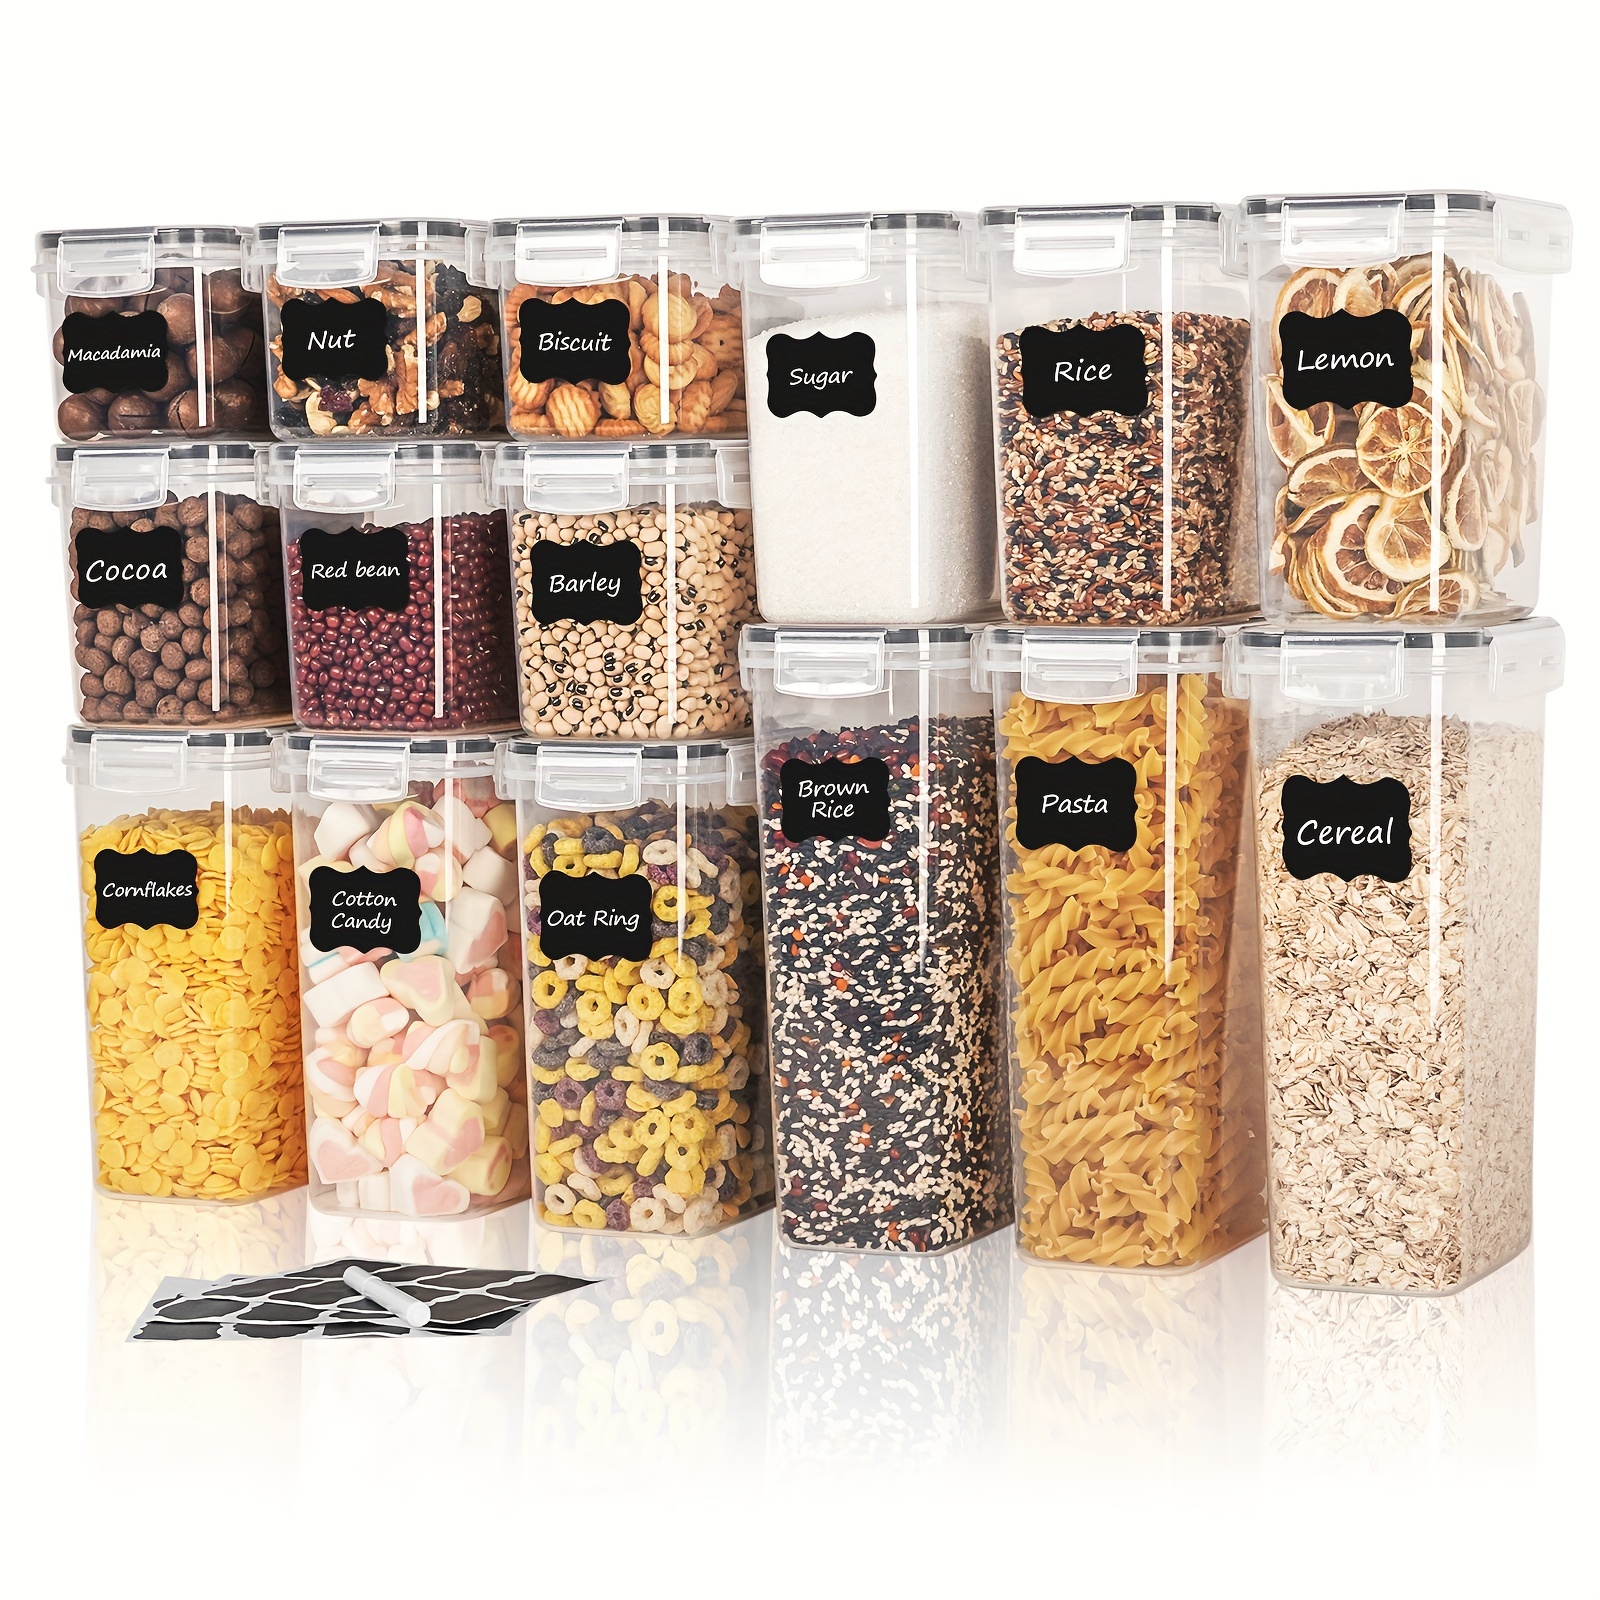 Airtight Food Storage Container with Lids - New BPA Free Clear Kitchen and Pantry Organization Canisters with Durable Lids for Cereal, Nut Candy Dry